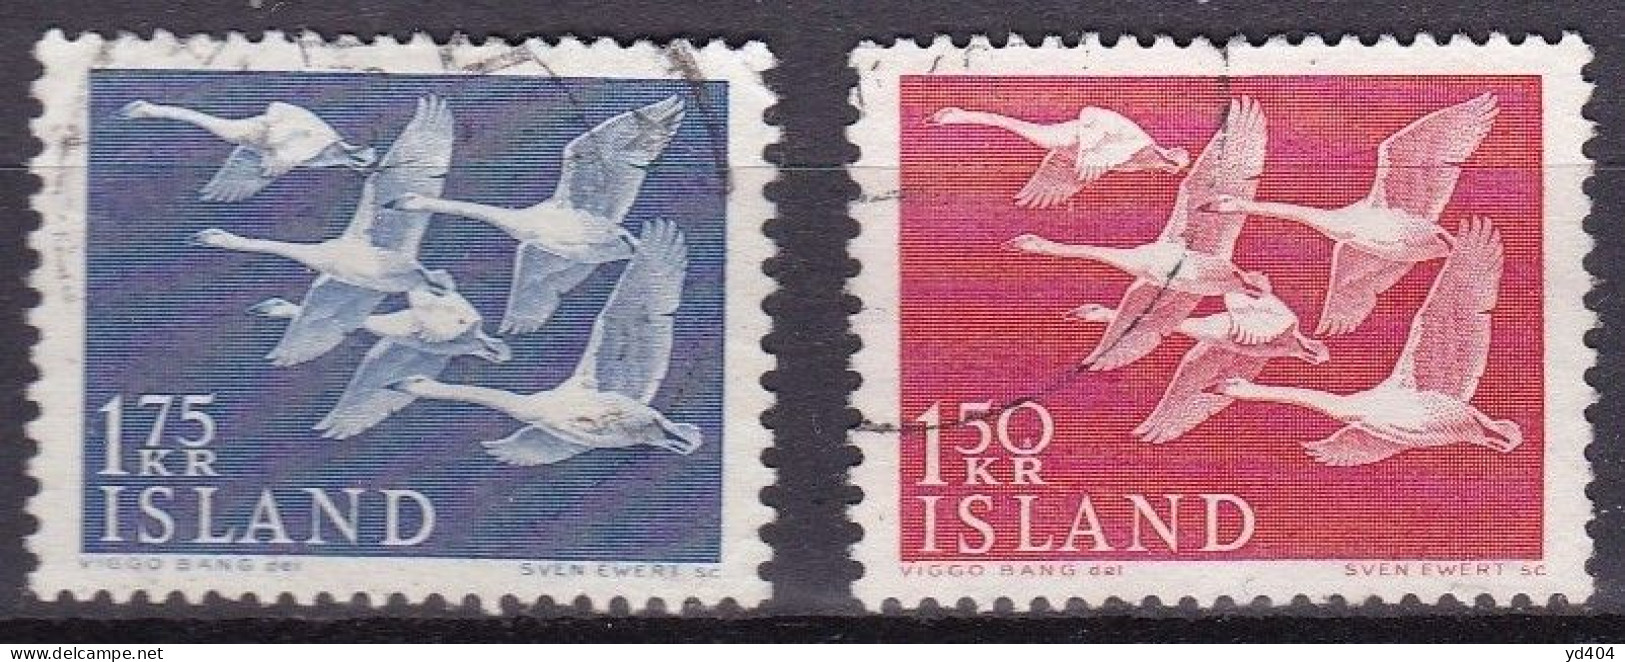 IS061 – ISLANDE – ICELAND – 1956 – NORTHEN COUNTRIES ISSUE – Y&T # 270/1 USED 15 € - Usados